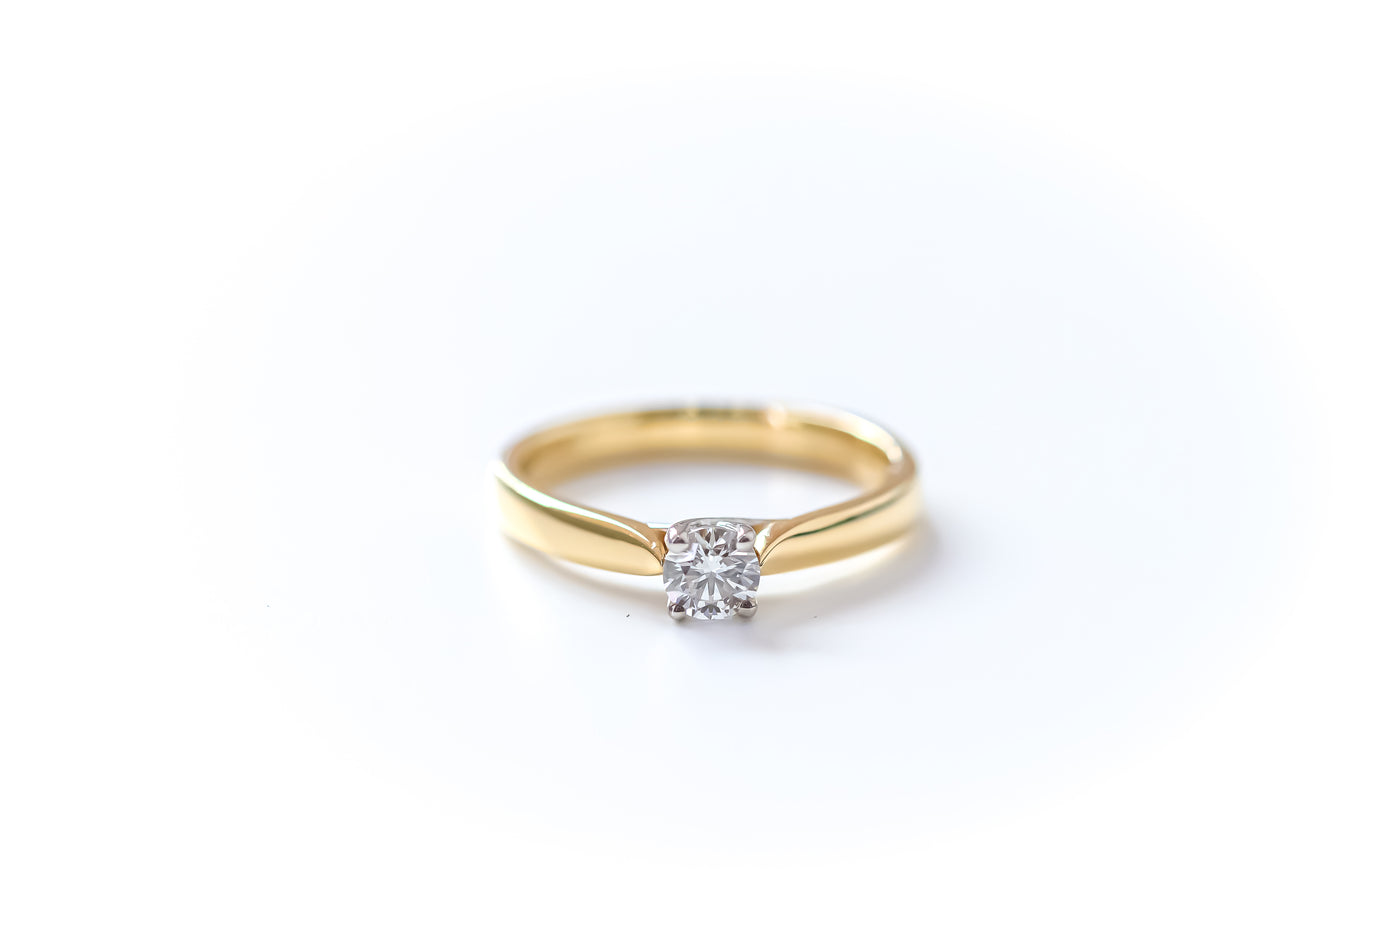 18ct Yellow Gold 4 Claw Solitaire Diamond Engagement Ring